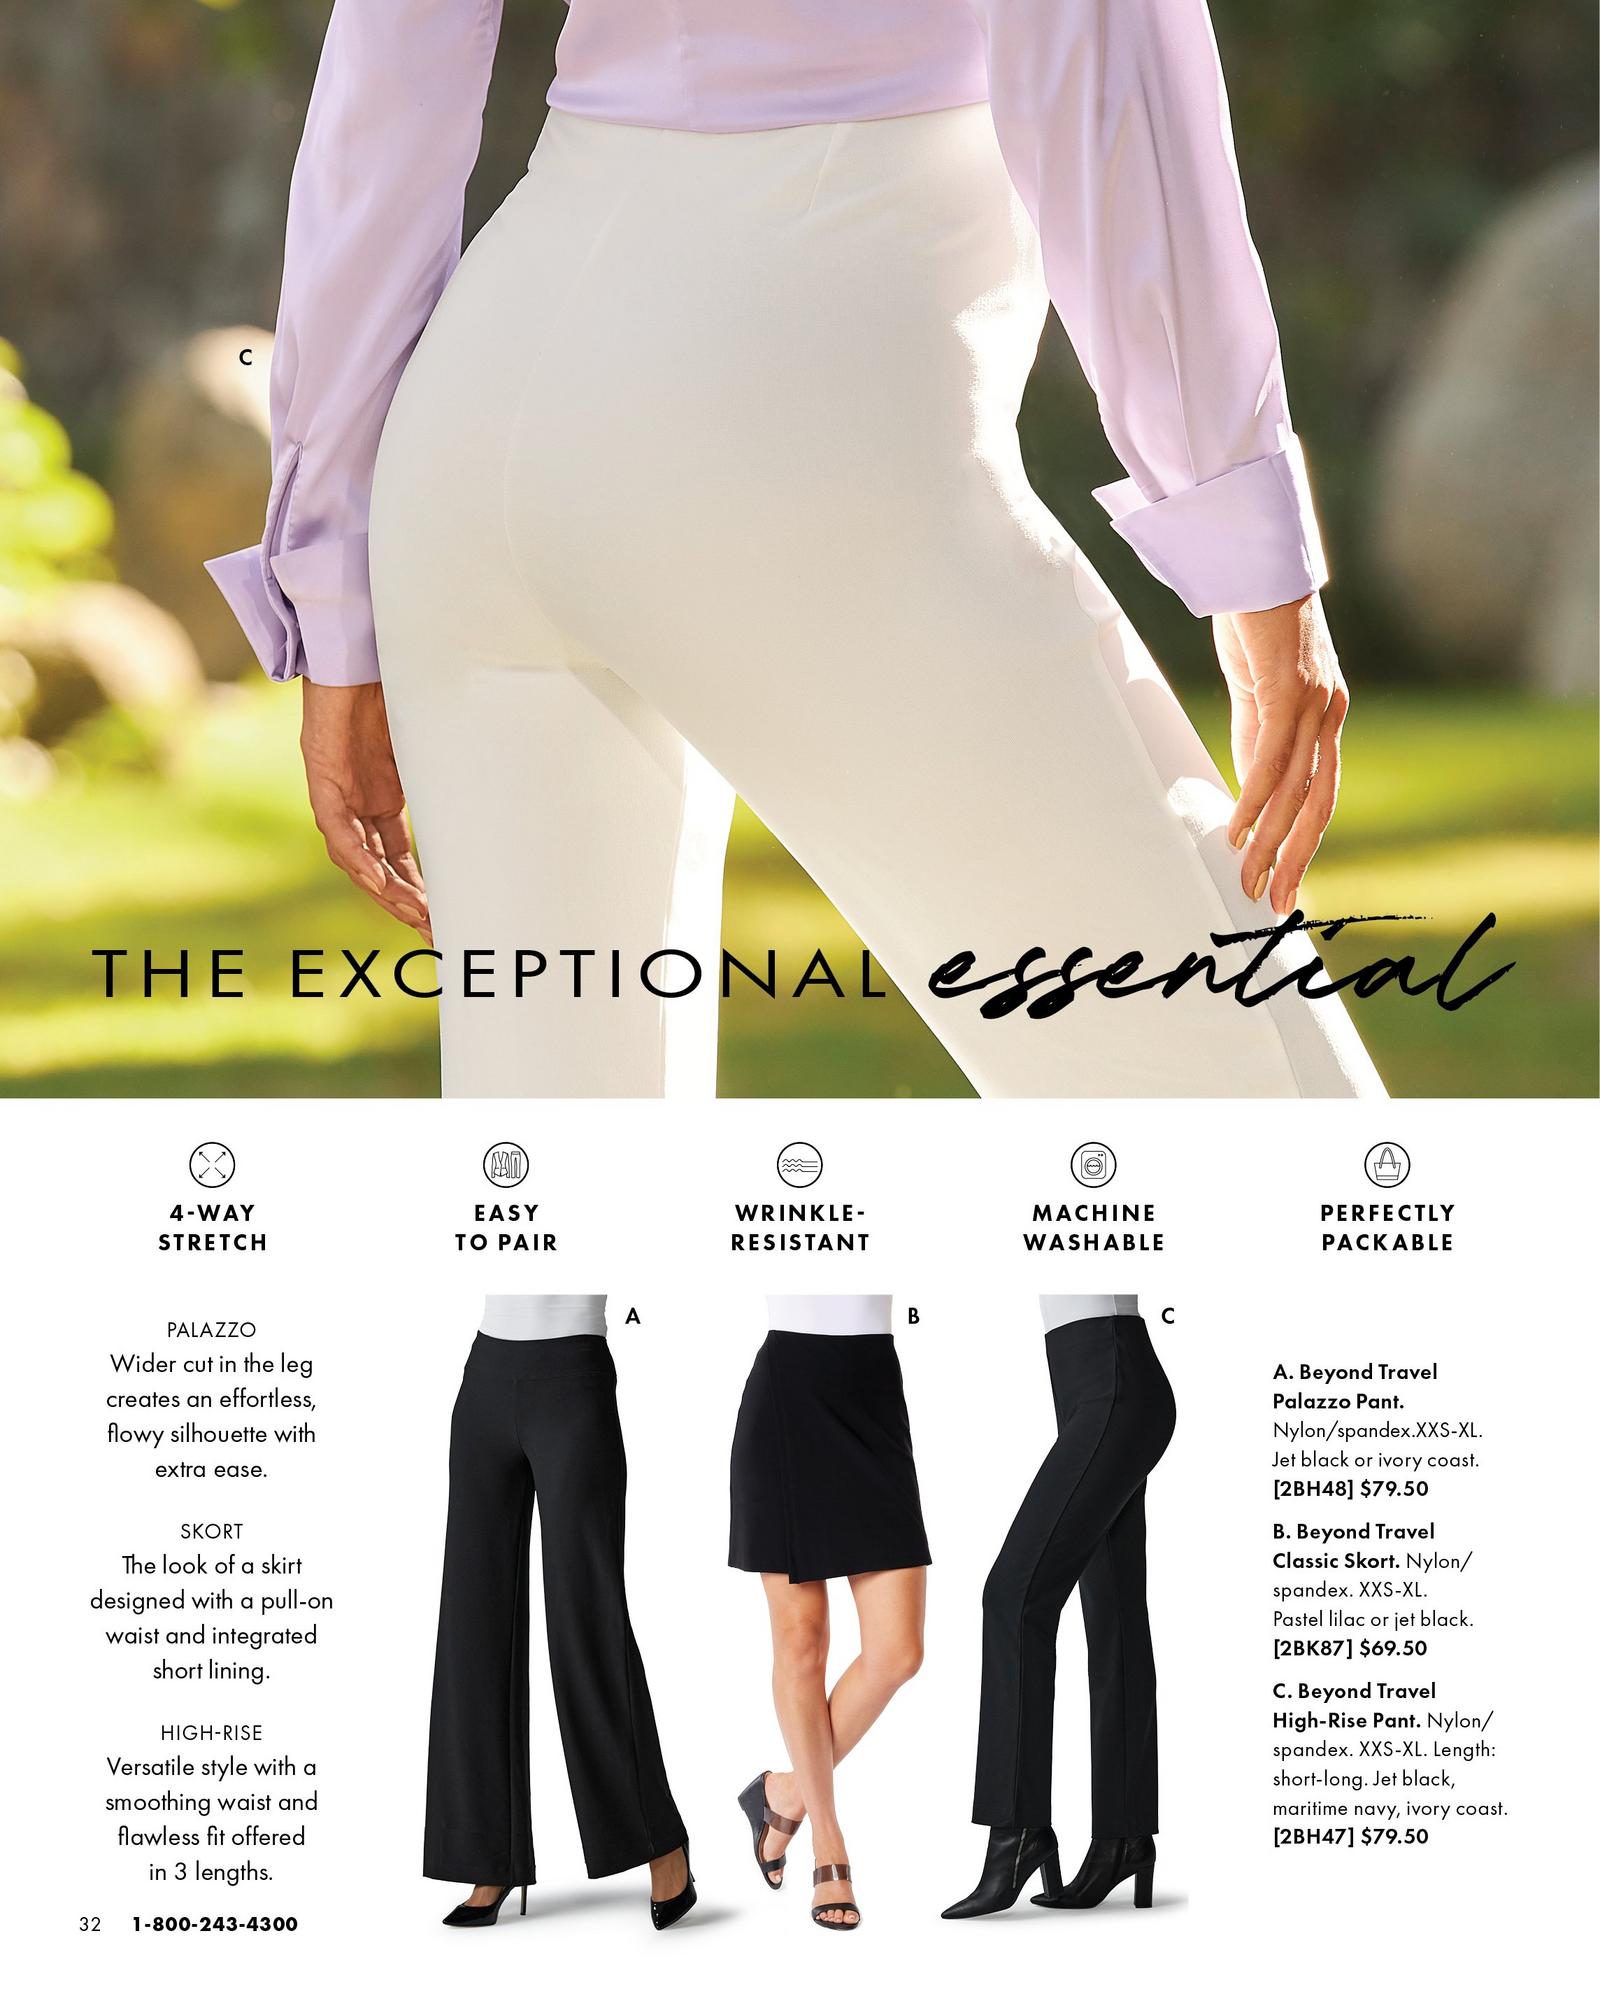 top model wearing a lavender long-sleeve top and white high-waisted pants. bottom panel shows black palazzo pants, black skort, and black straight-leg pants.